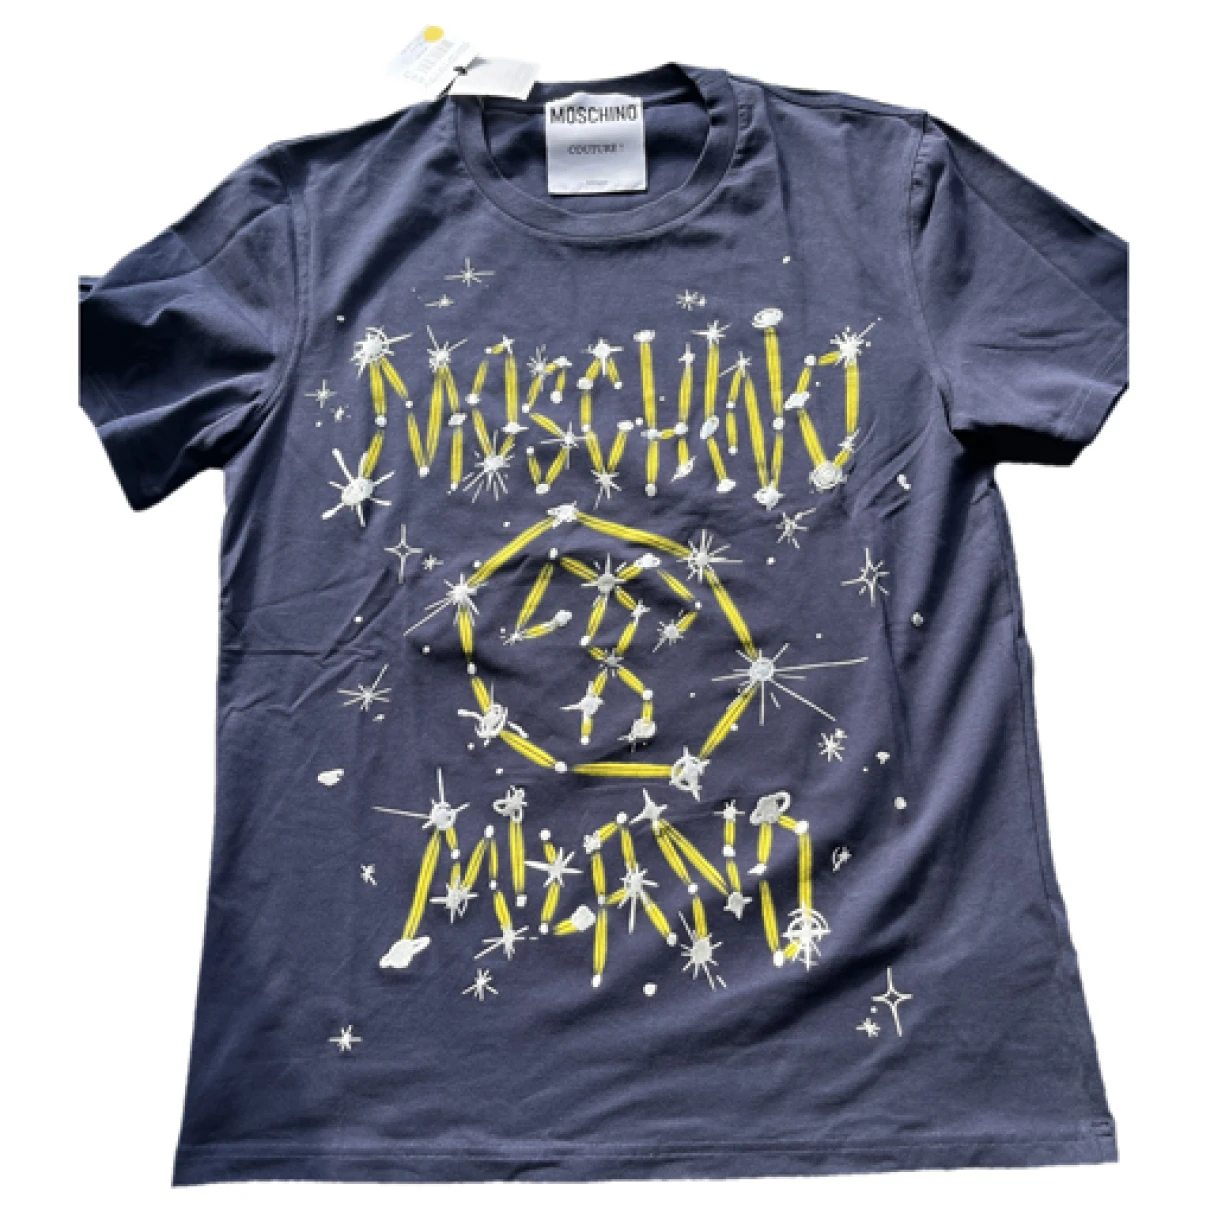 Pre-owned Moschino Shirt In Grey